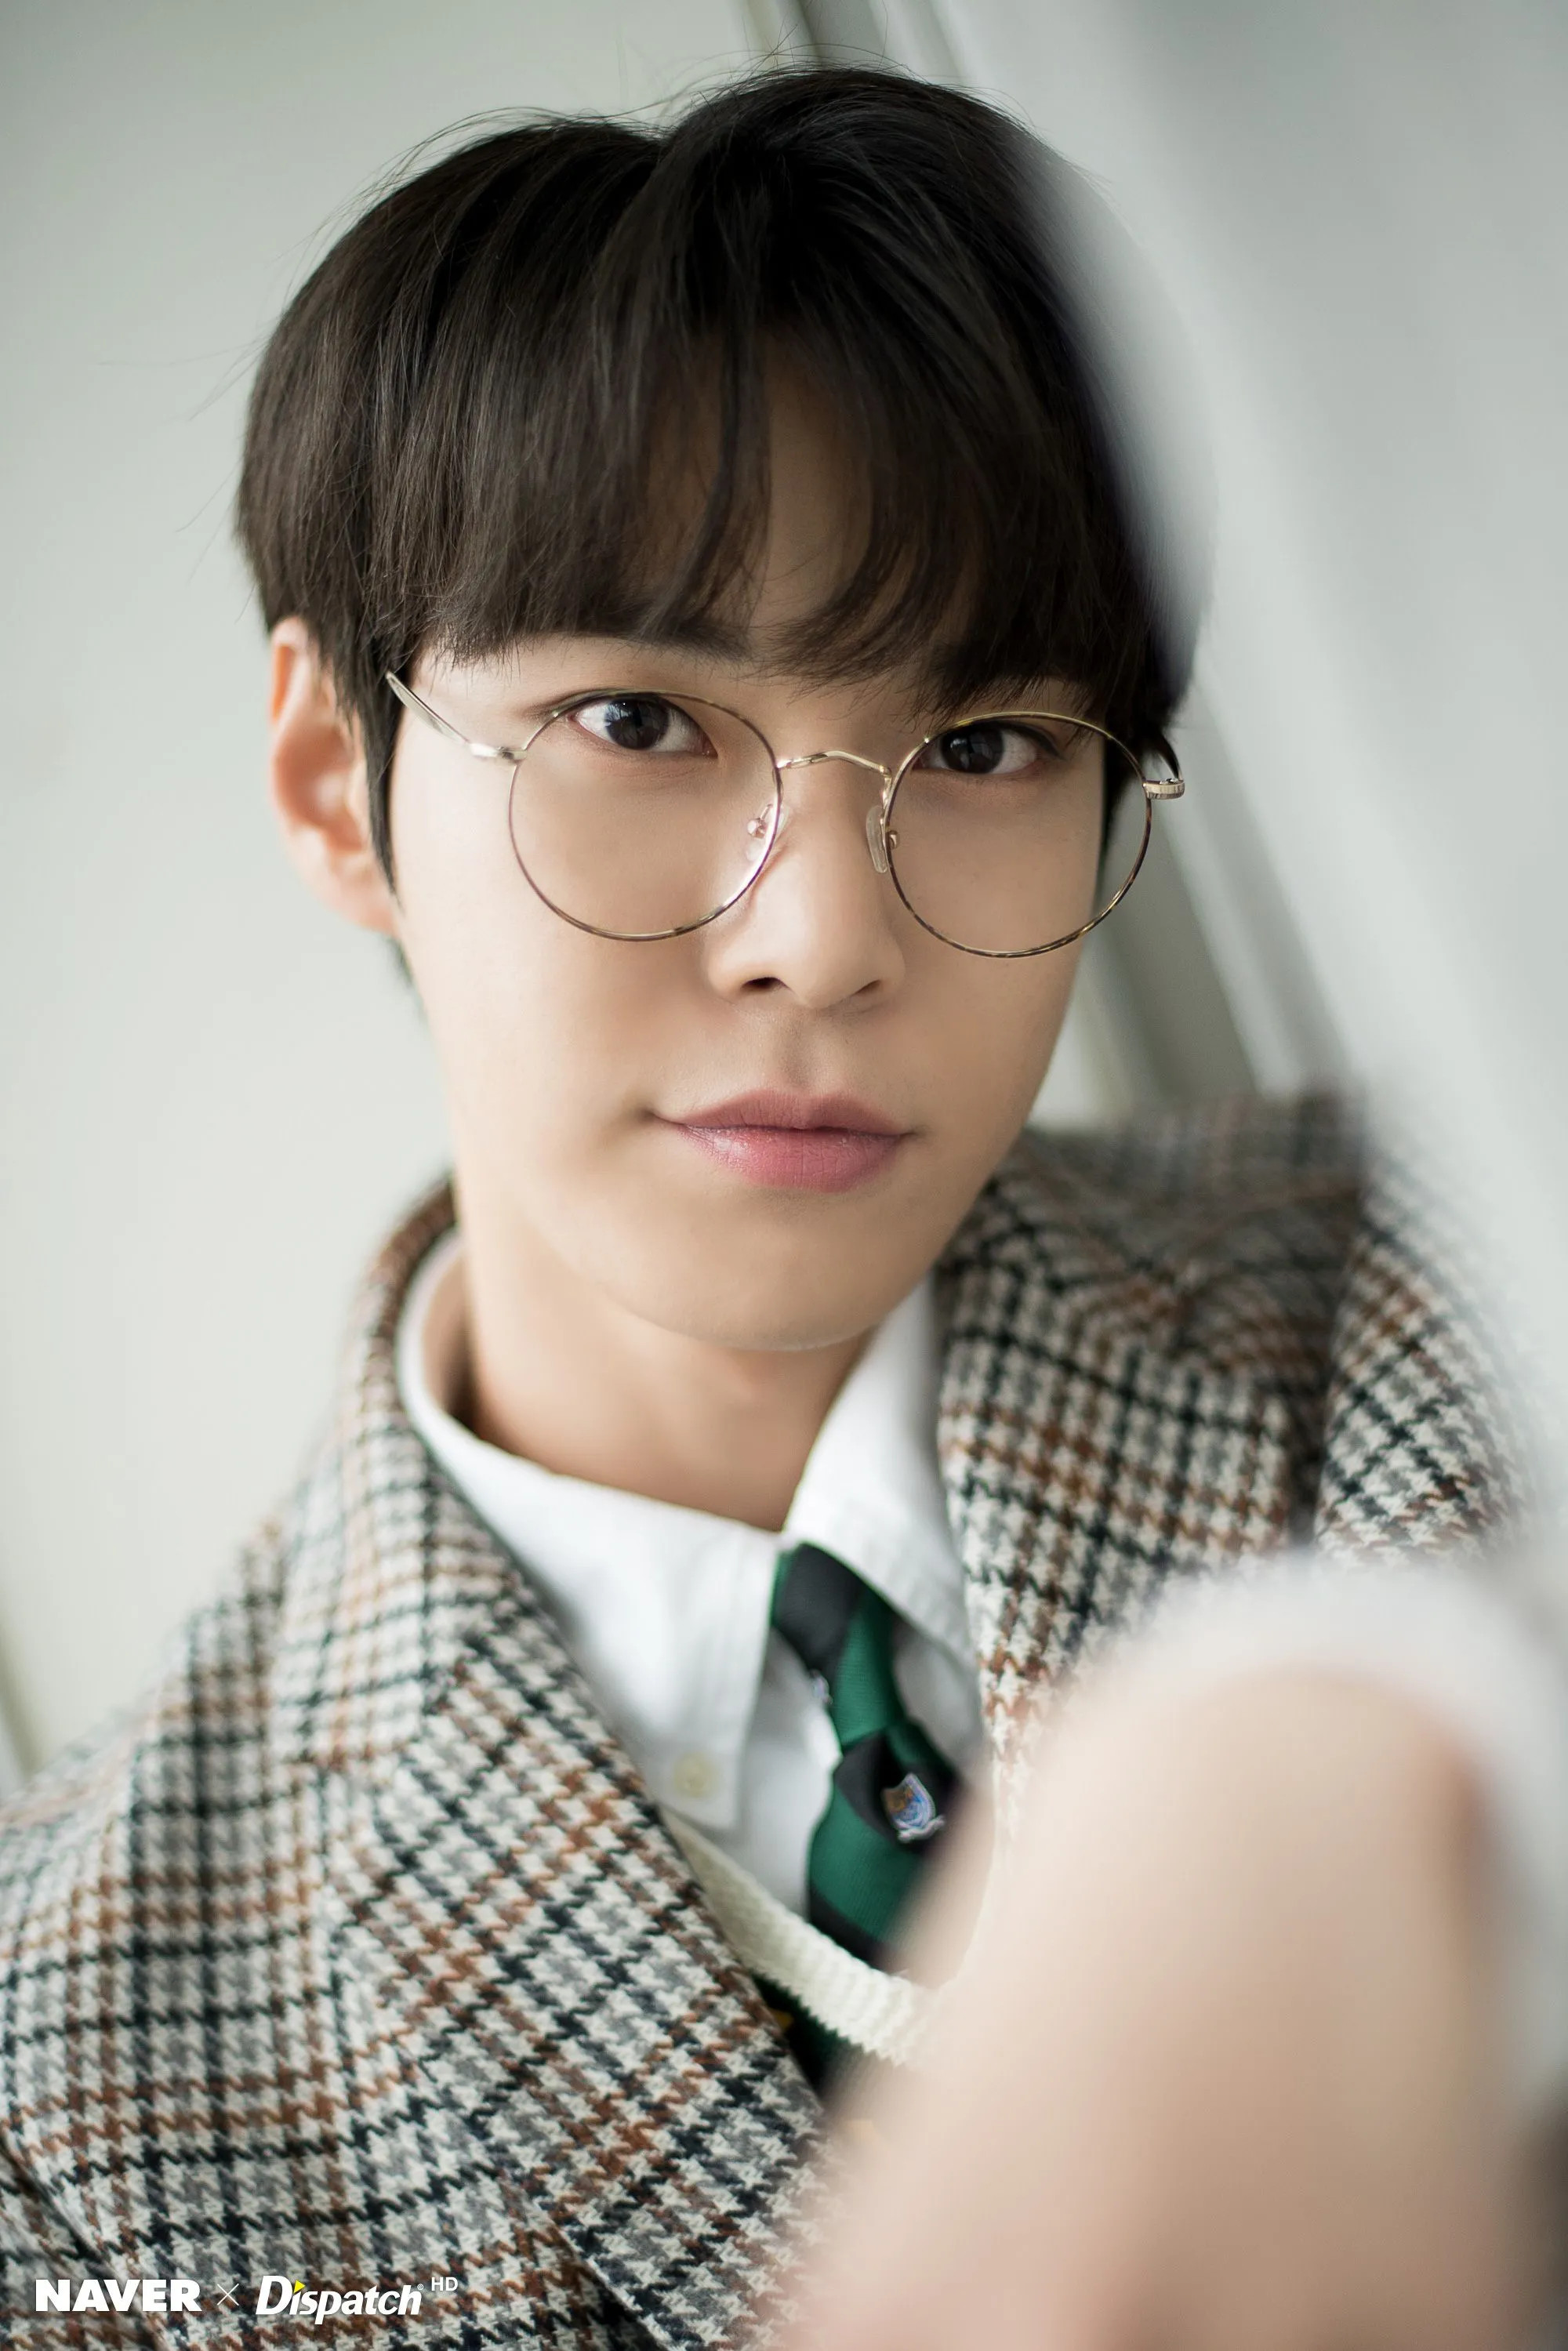 November 22, 2019 NCT's Doyoung - V promotion photoshoot by Naver x ...